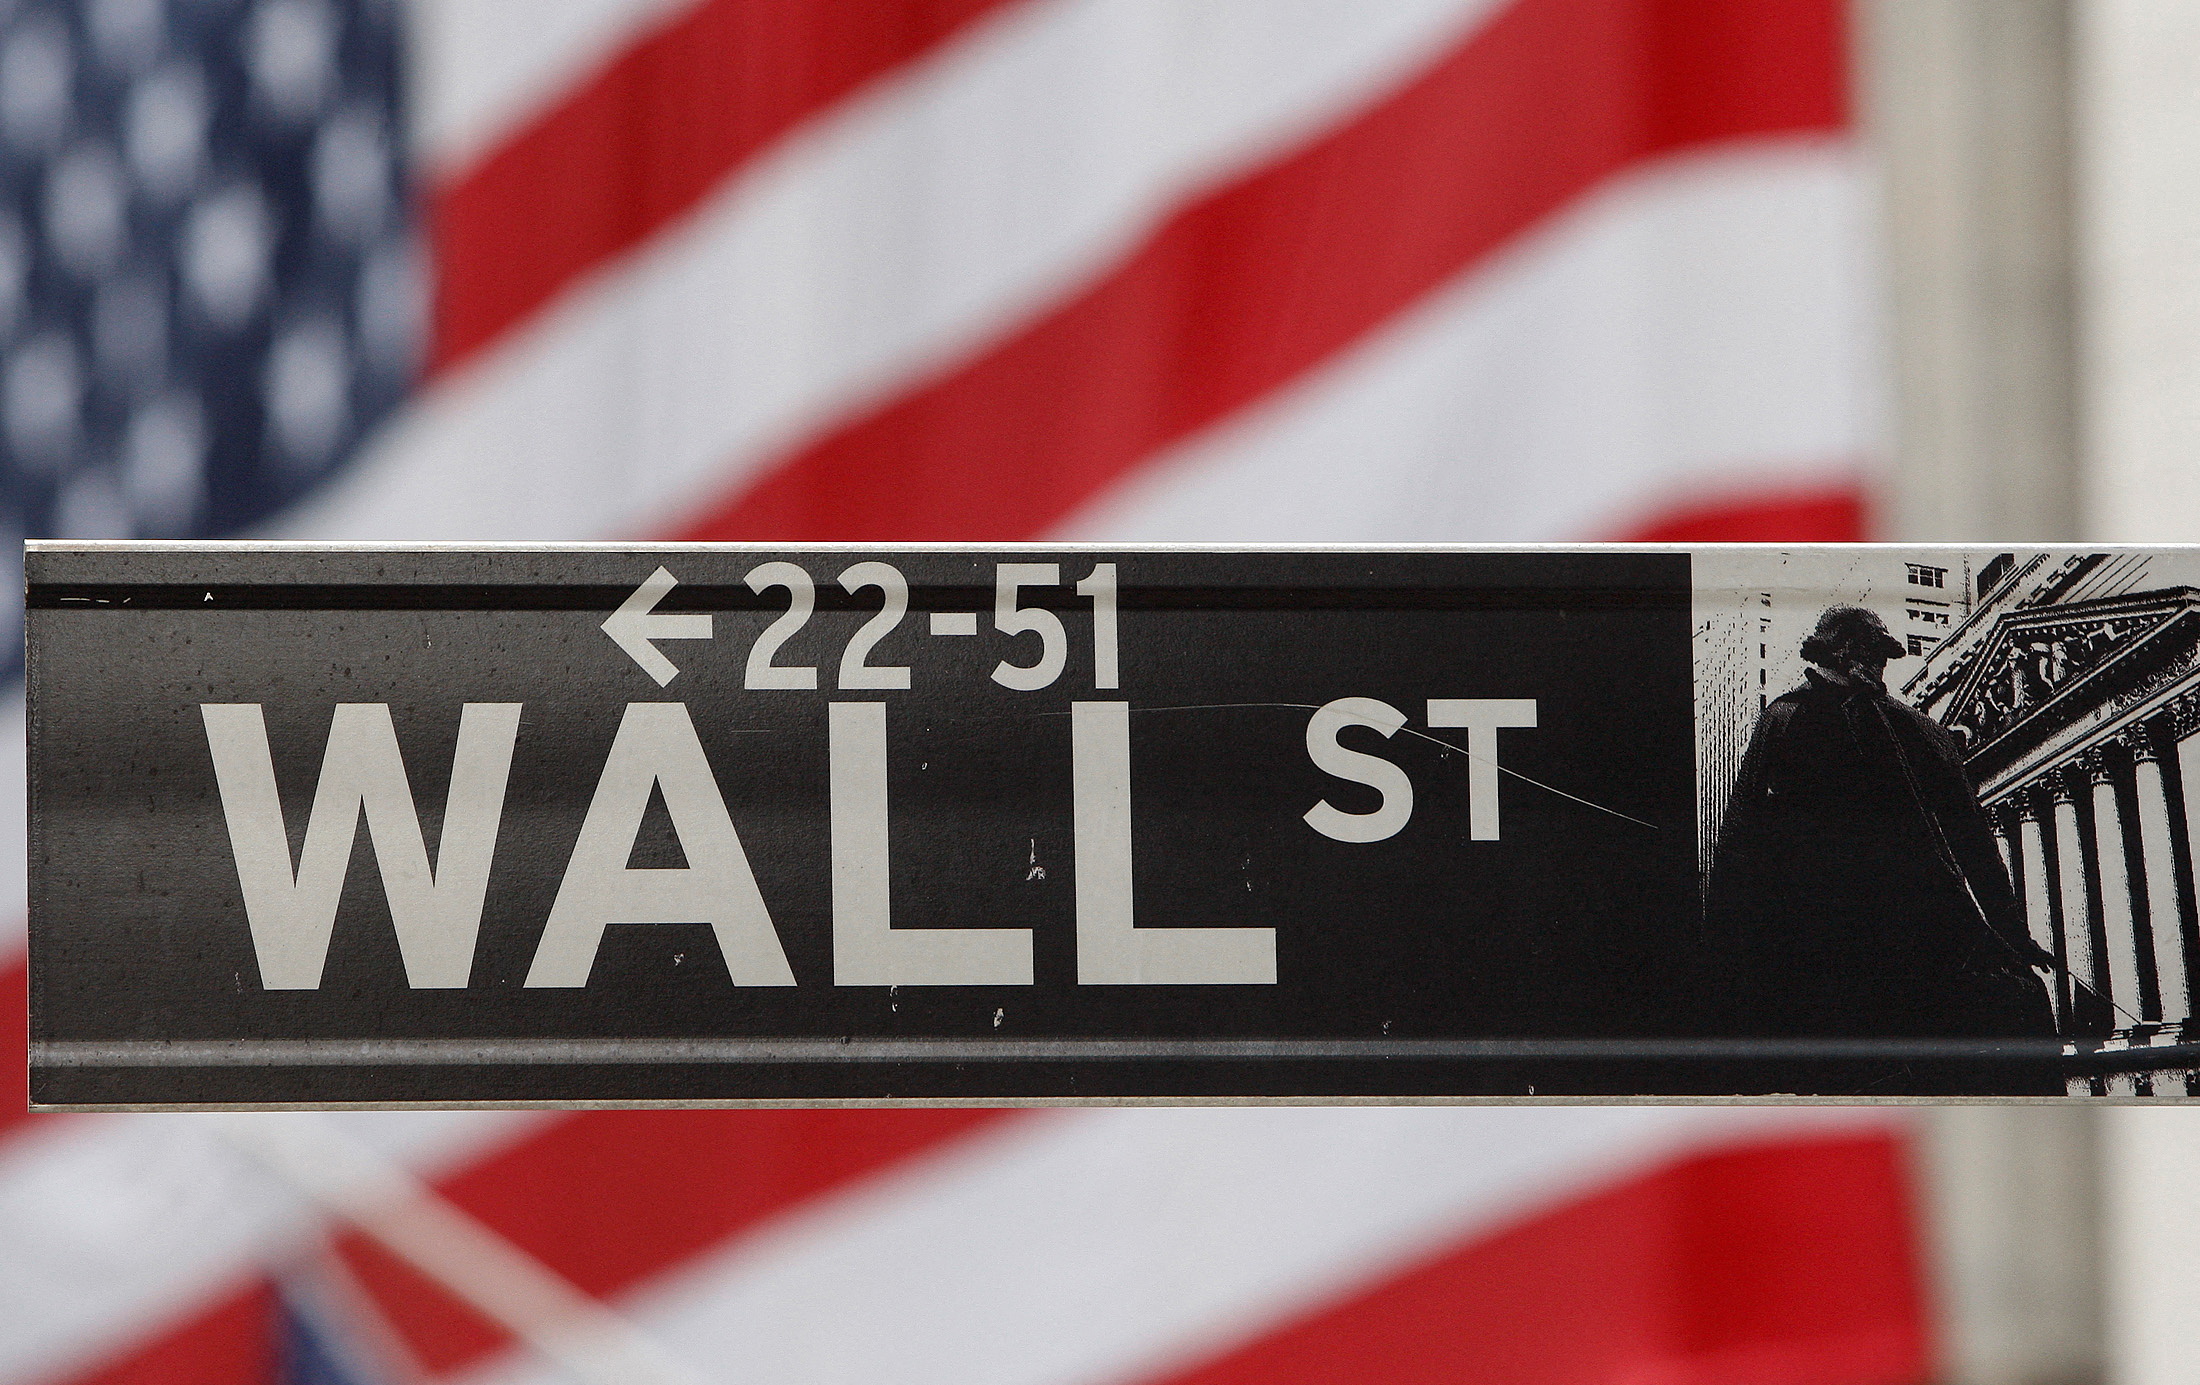 The Wall Street sign is seen in front of the New York Stock Exchange